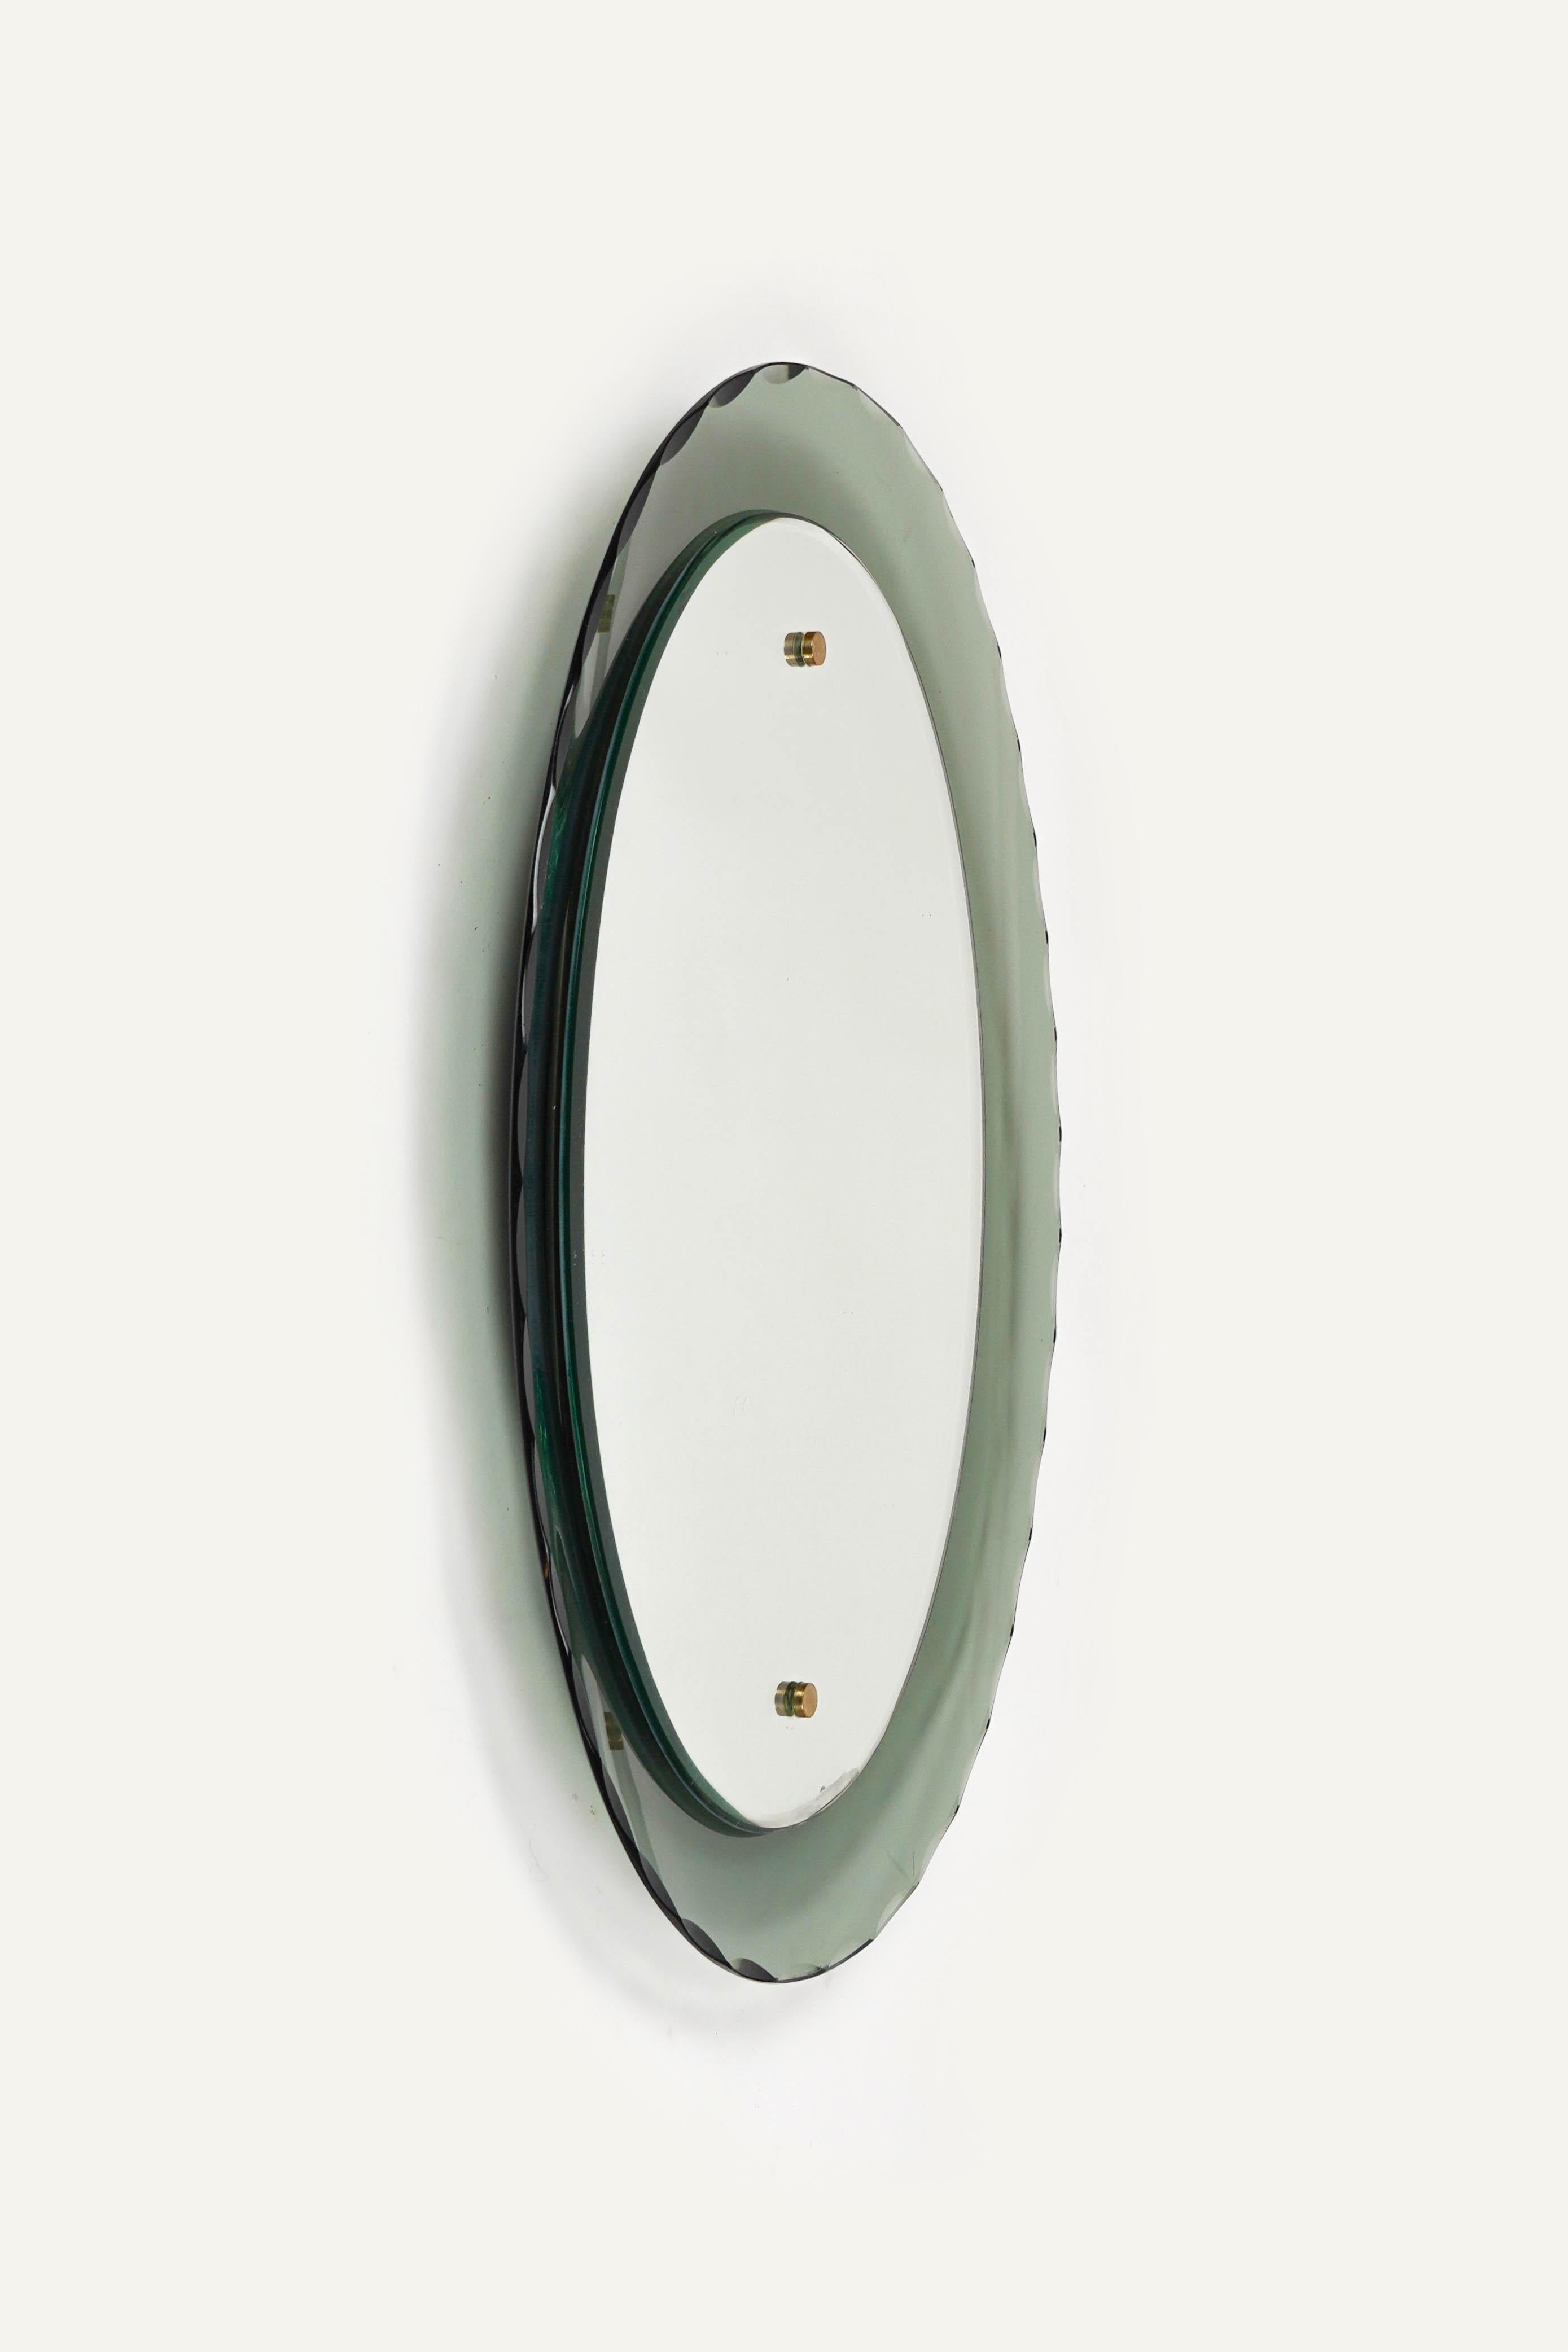 Italian Midcentury Oval Wall Mirror whit Smoked Glass Frame by Cristal Arte, Italy 1960s For Sale